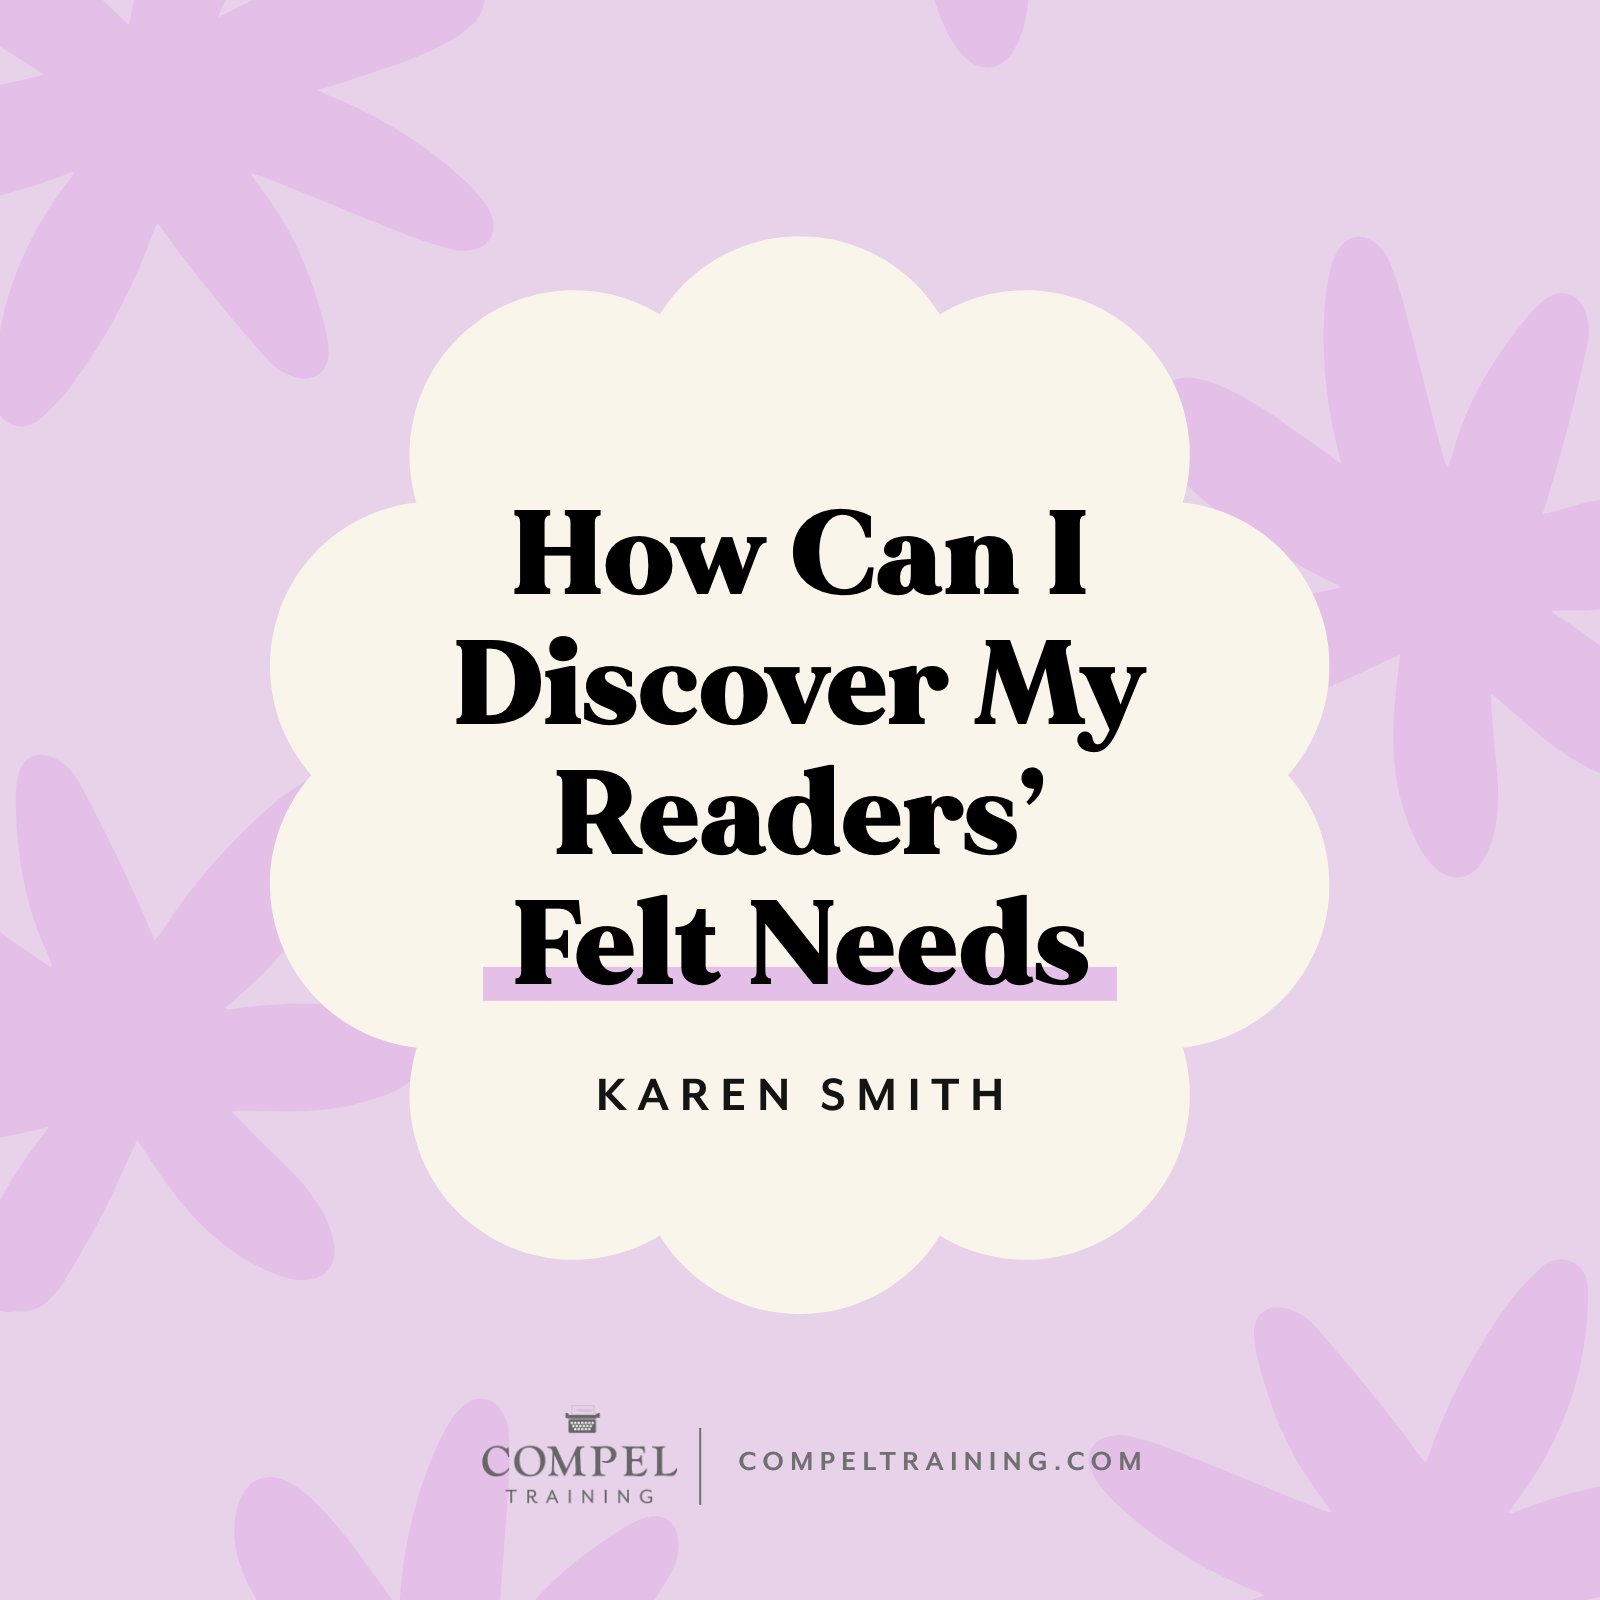 How Can I Discover My Readers’ Felt Needs?